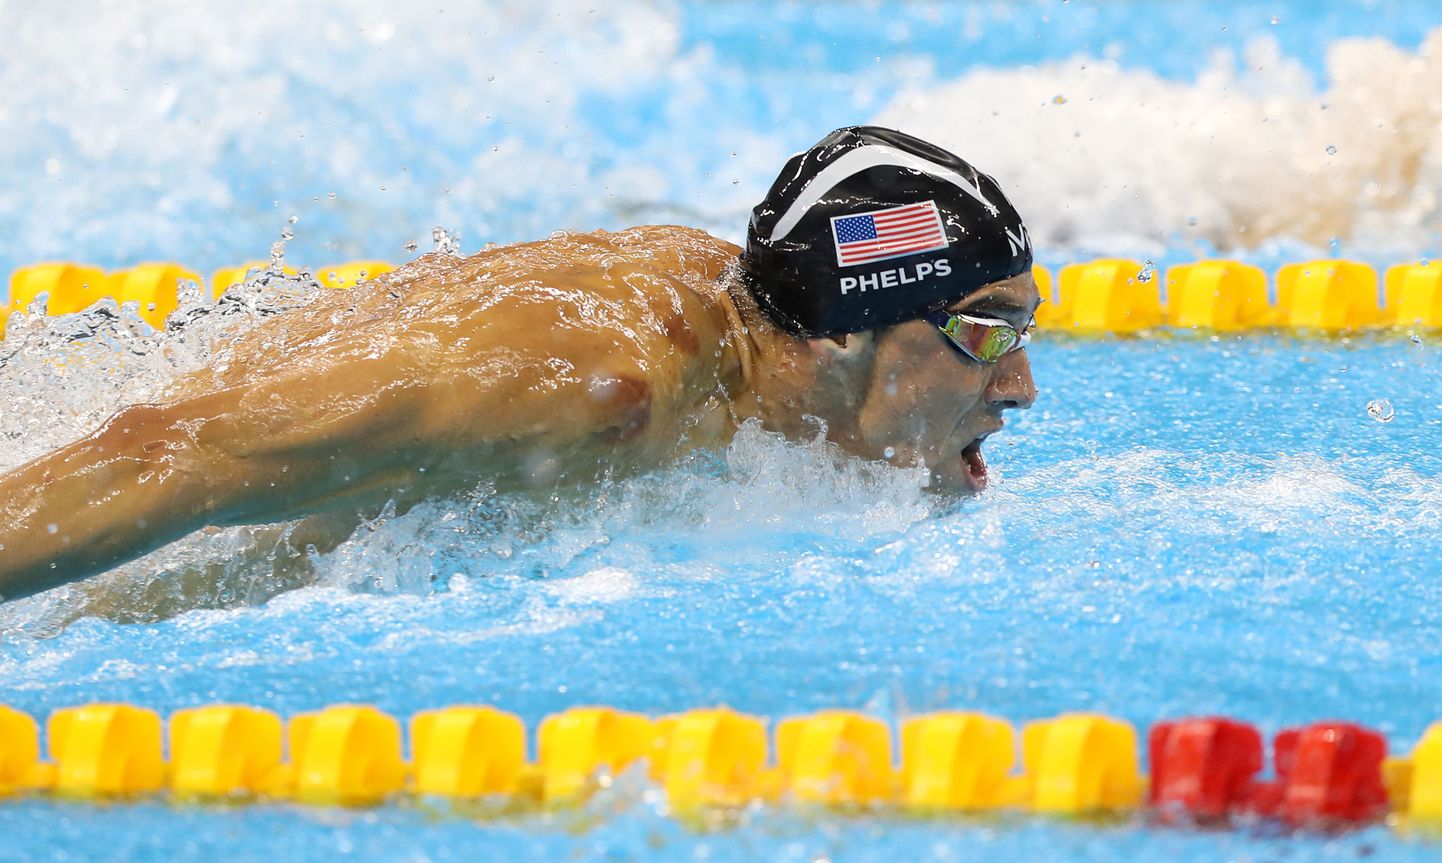 USA's Michael Phelps in action during his Men's 100m Butterfly Semi-Final at the Olympic Aquatics Stadium on the sixth day of the Rio Olympic Games, Brazil.